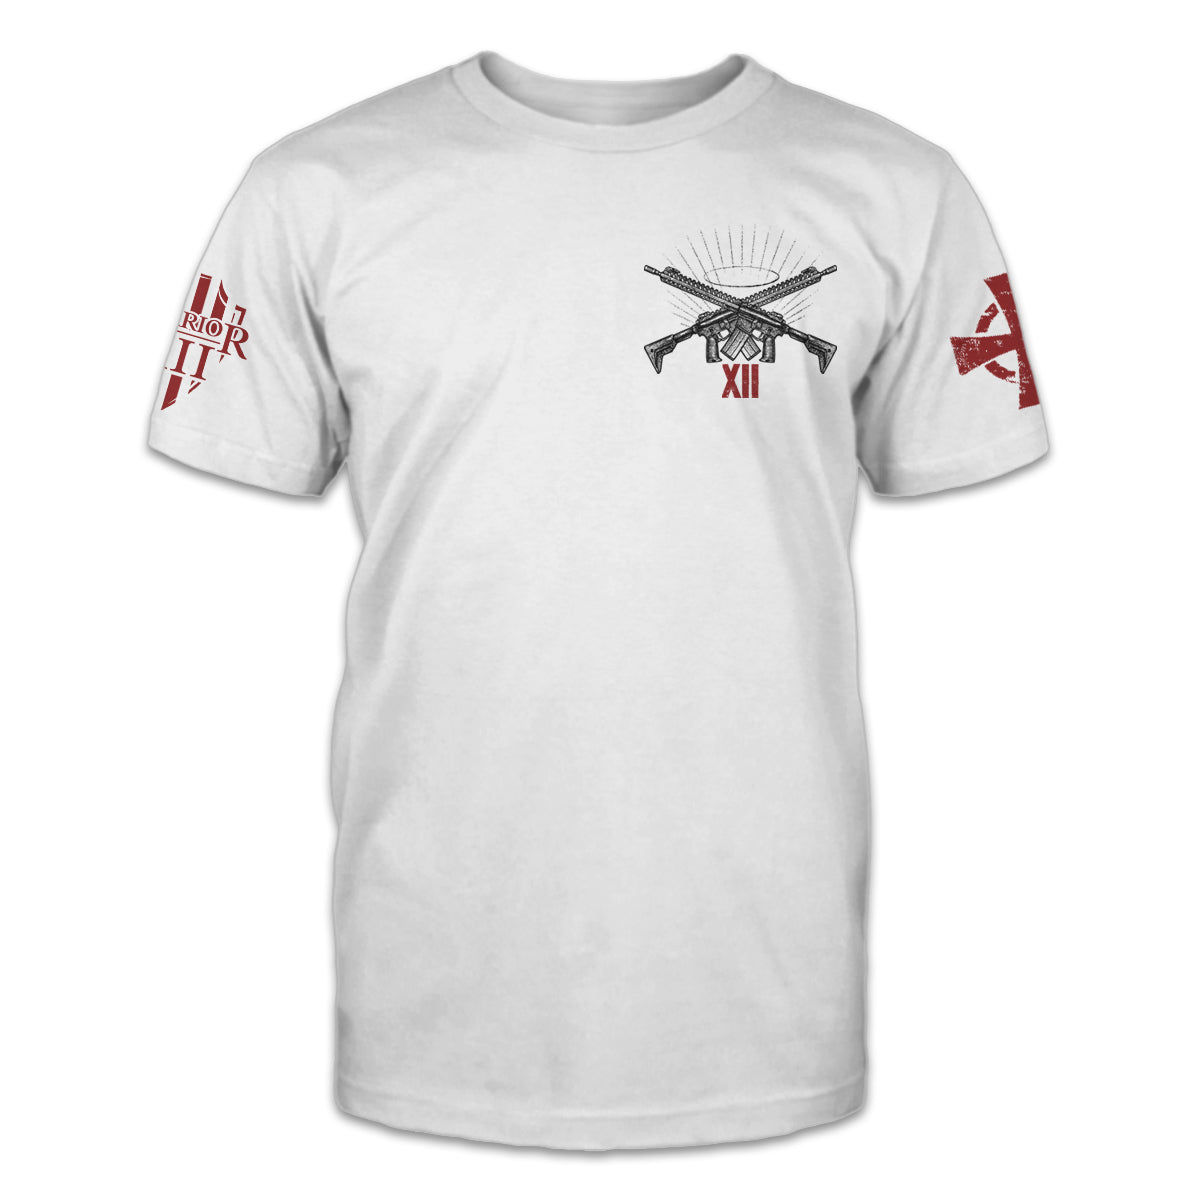 A white Archangels t-shirt with the two guns crossed over printed on the front of the shirt.